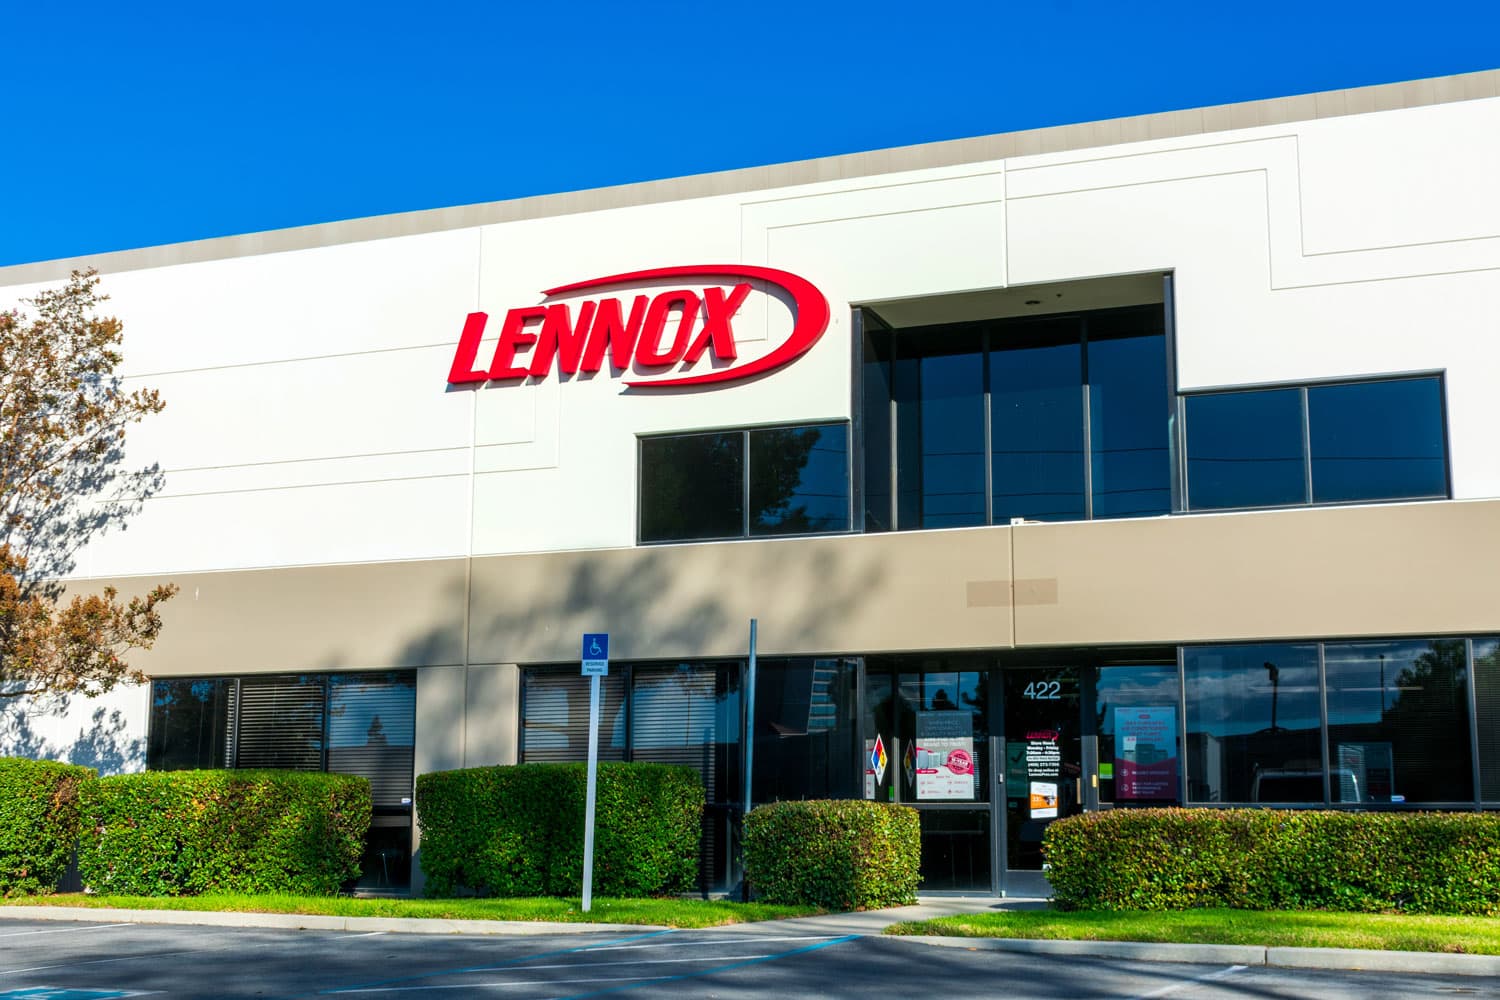 A Lennox manufacturing company photographed outside